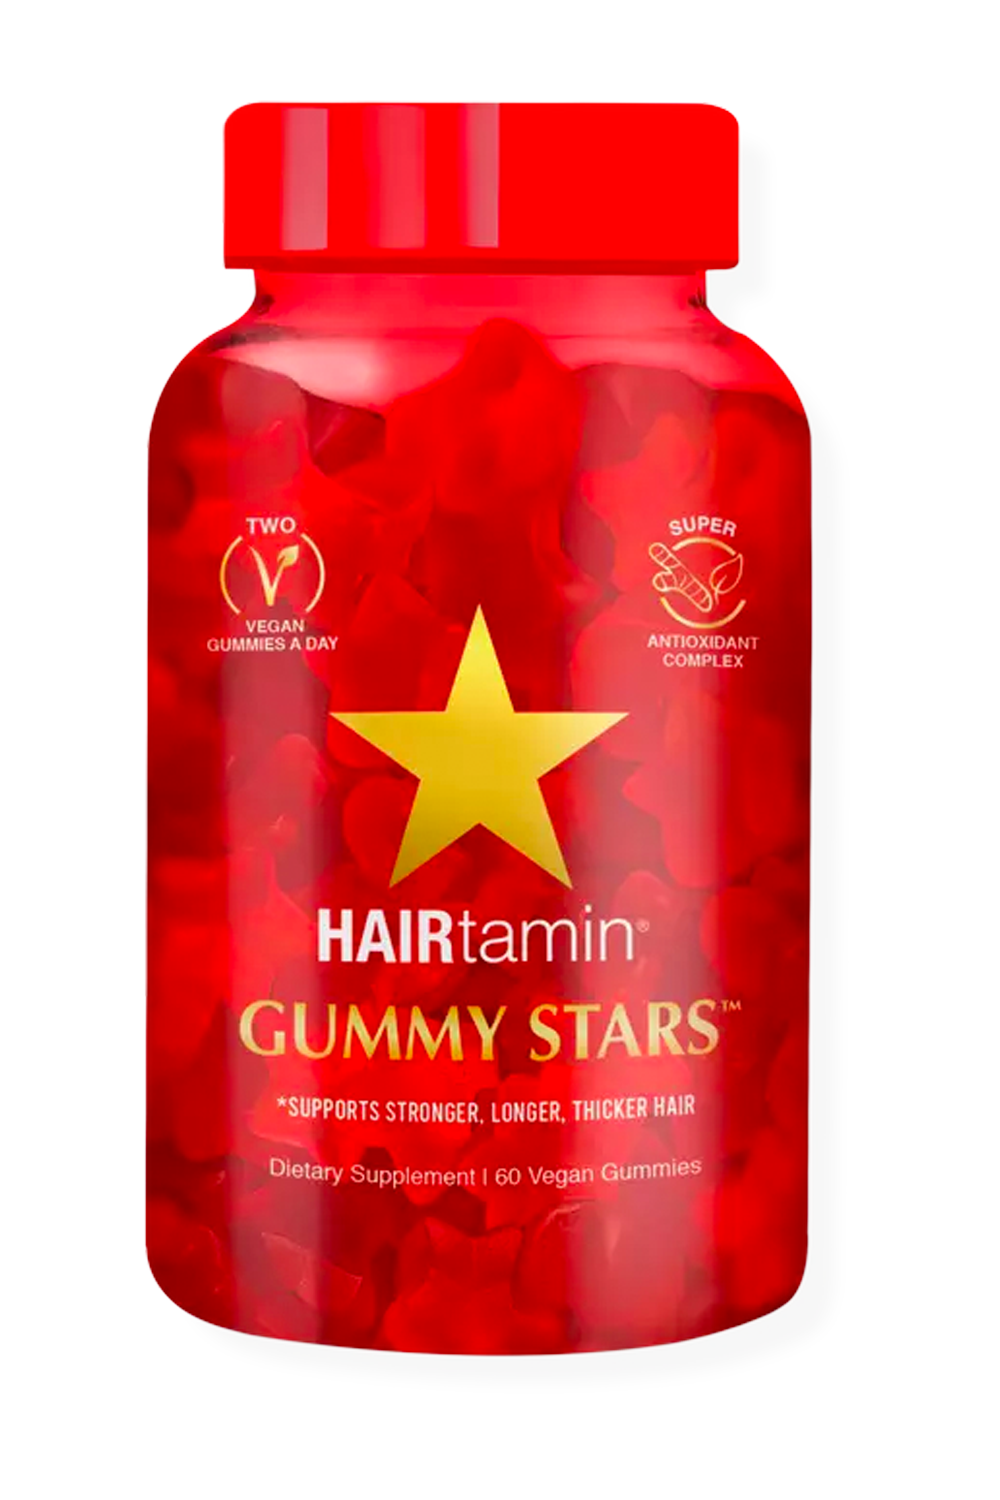 11 Best Hair Growth Vitamins, Tested & Reviewed for 2023